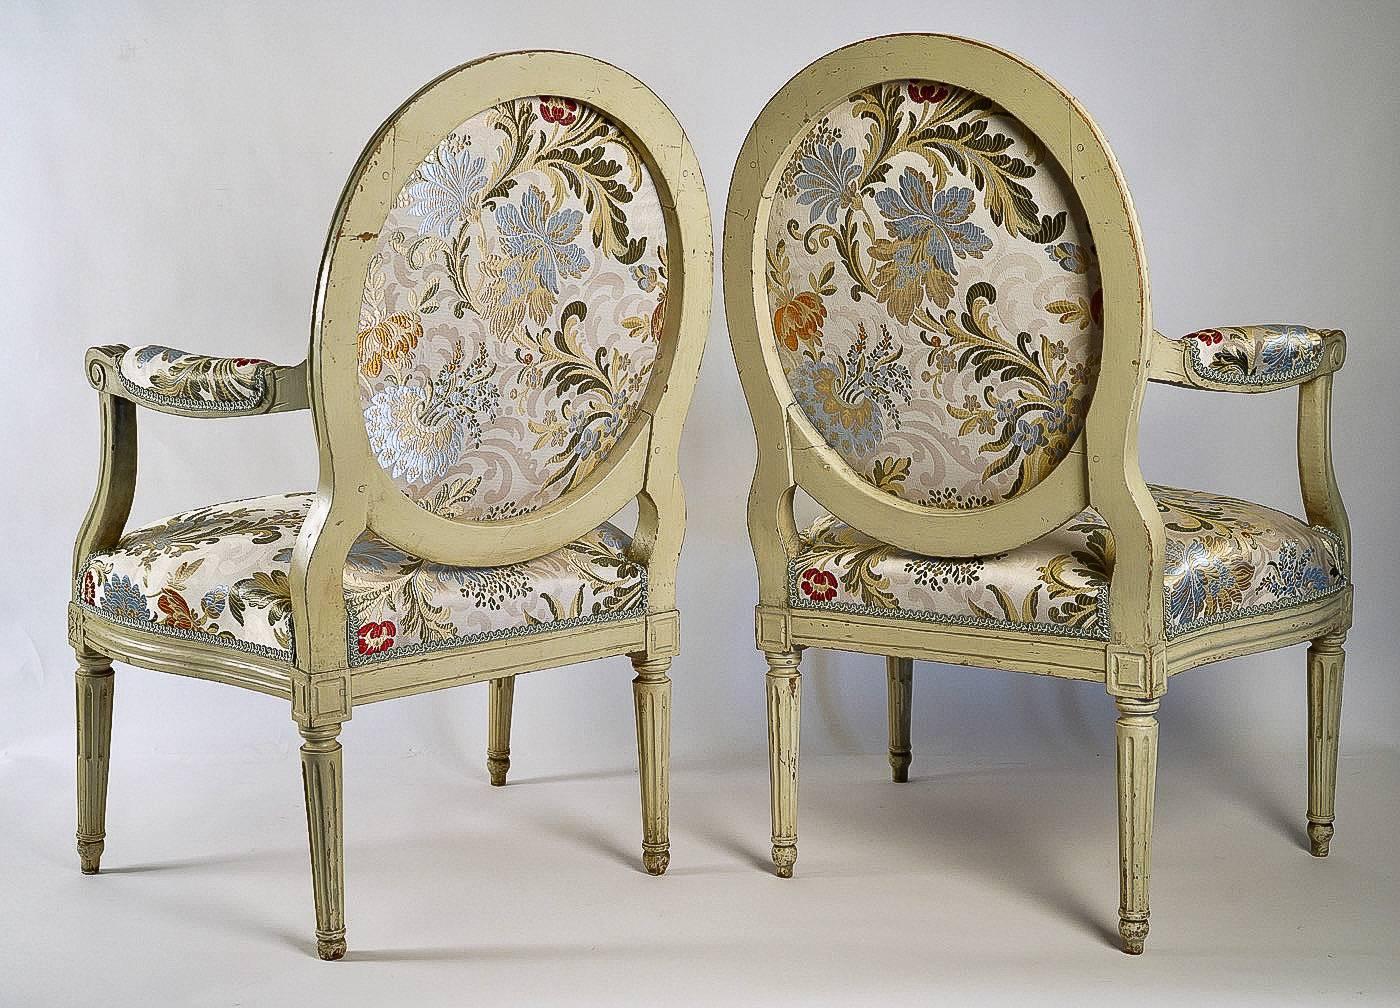 French 18th-Century, Lacquered Wood Pair of Large Armchairs Louis XVI Period For Sale 6